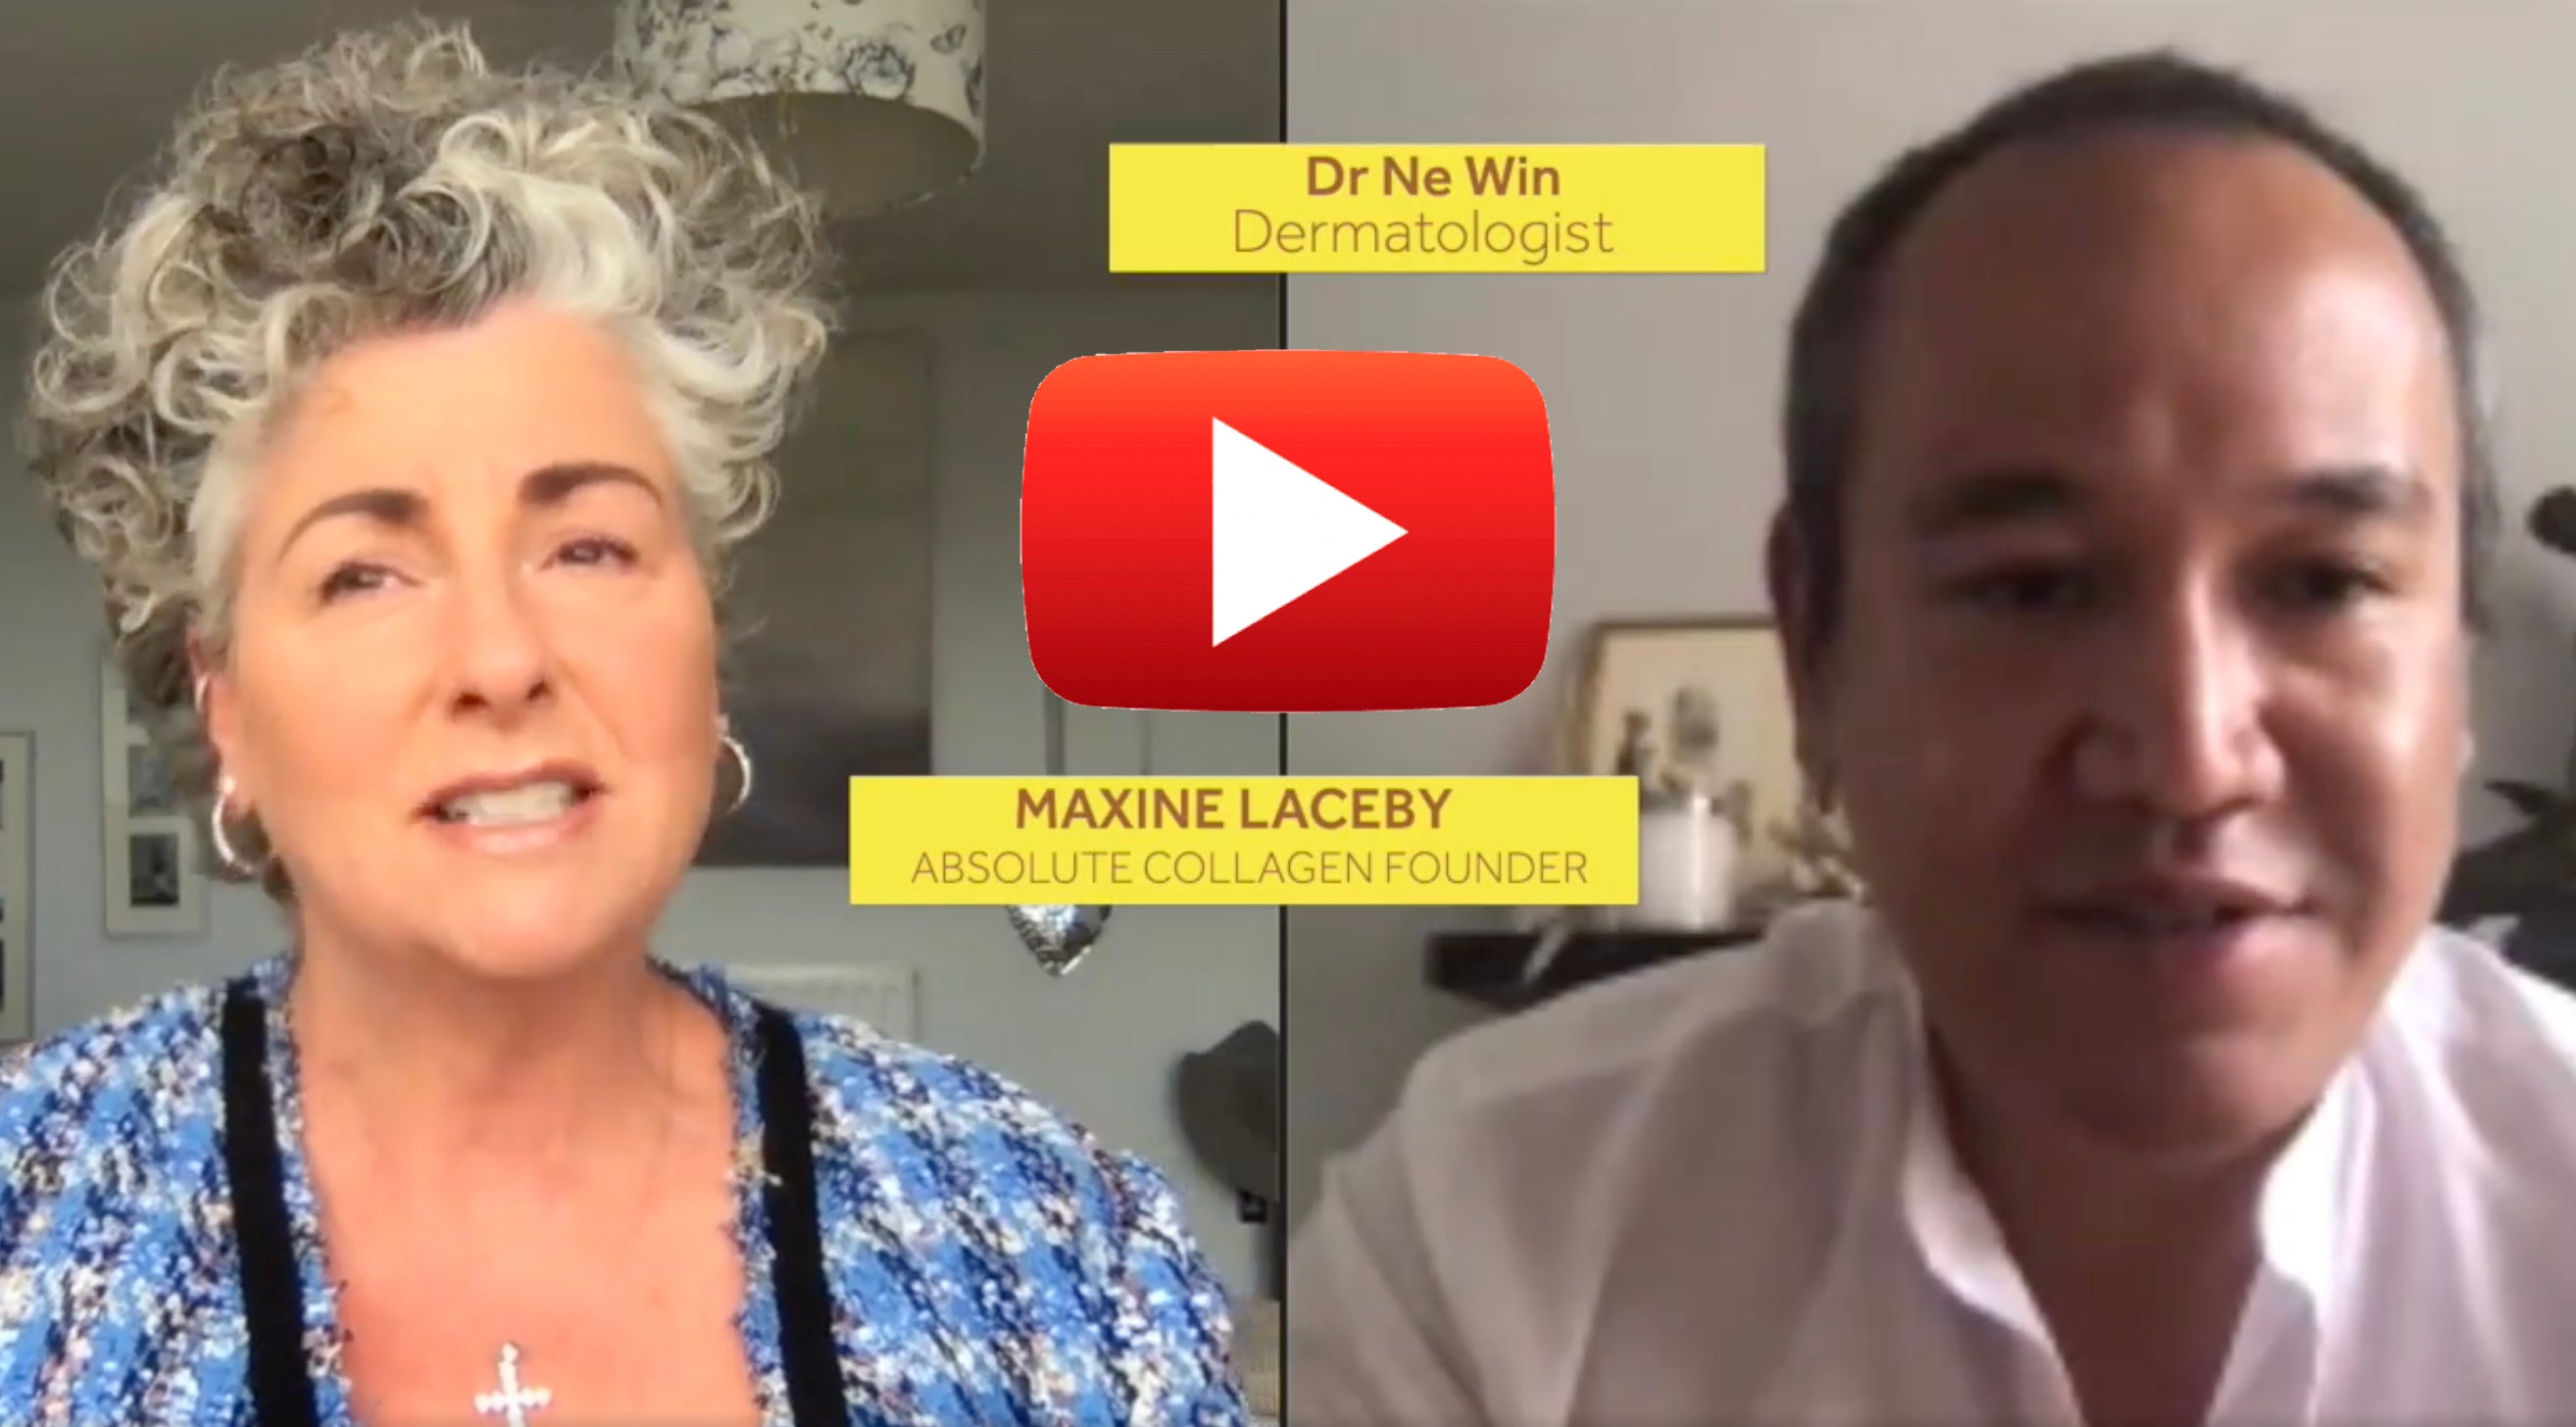 Image showing screenshot of Maxine Laceby and Dr Ne Win